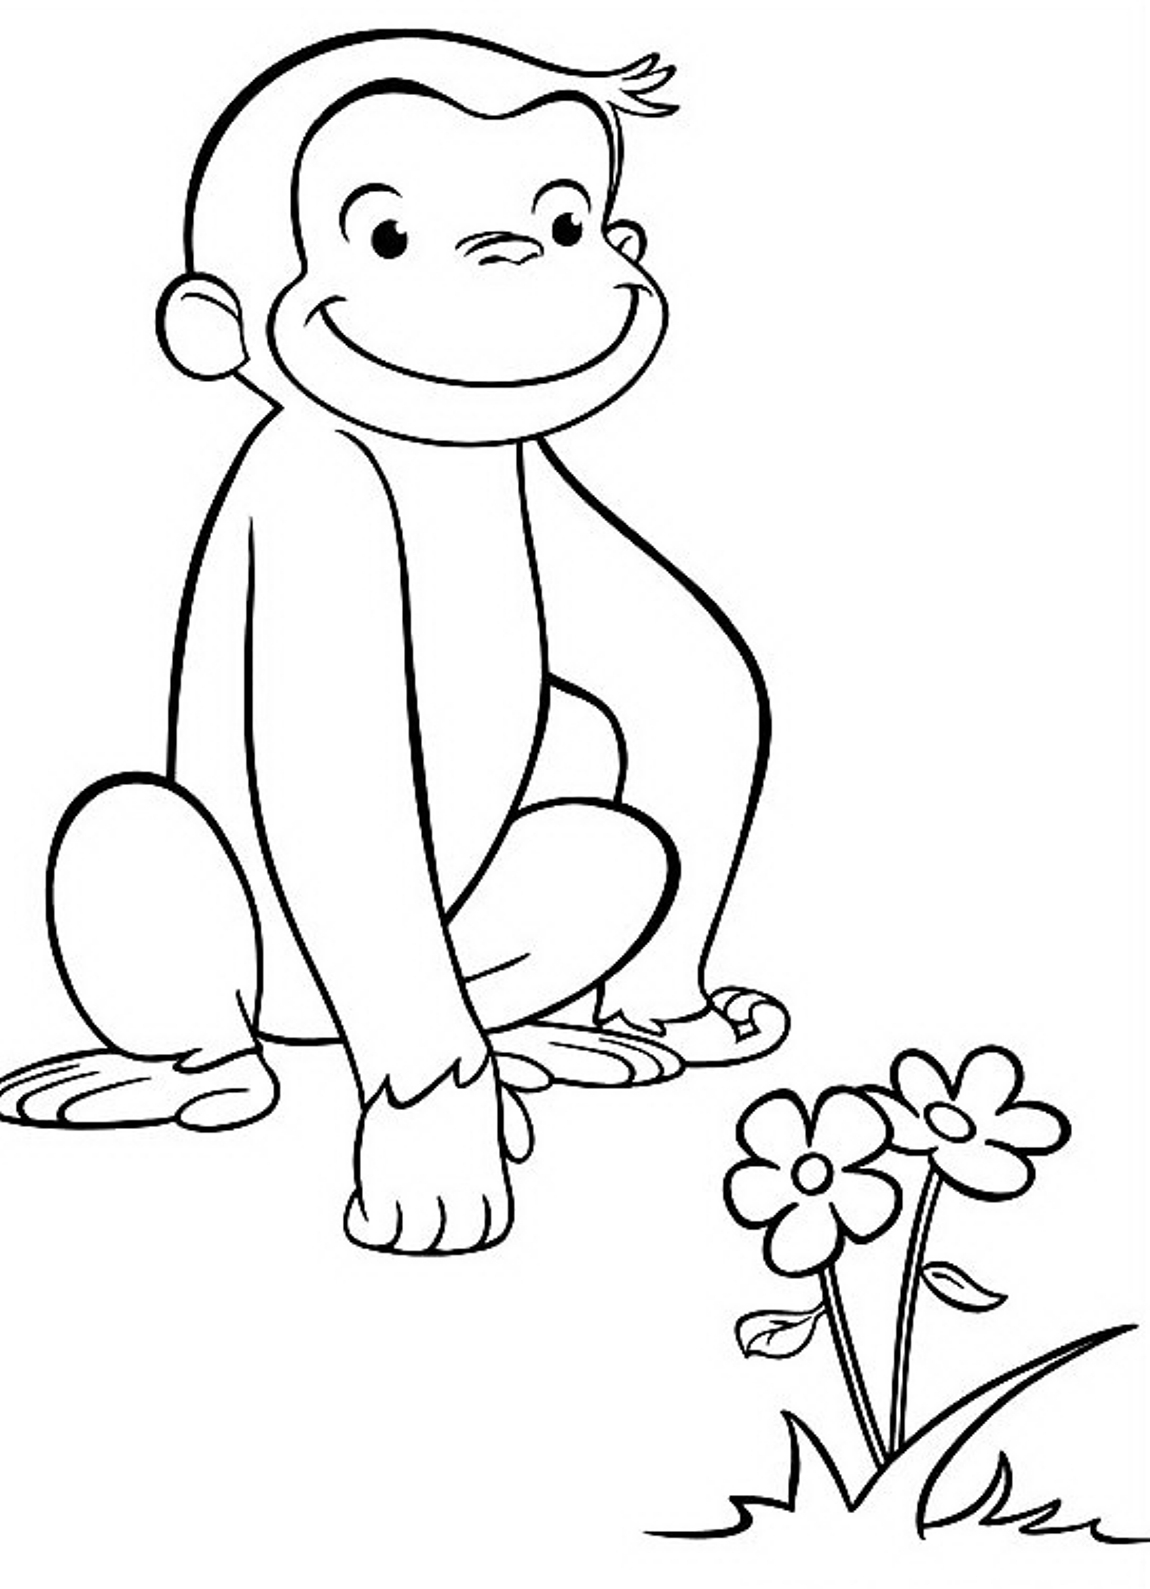 Curious coloring pages to download and print for free